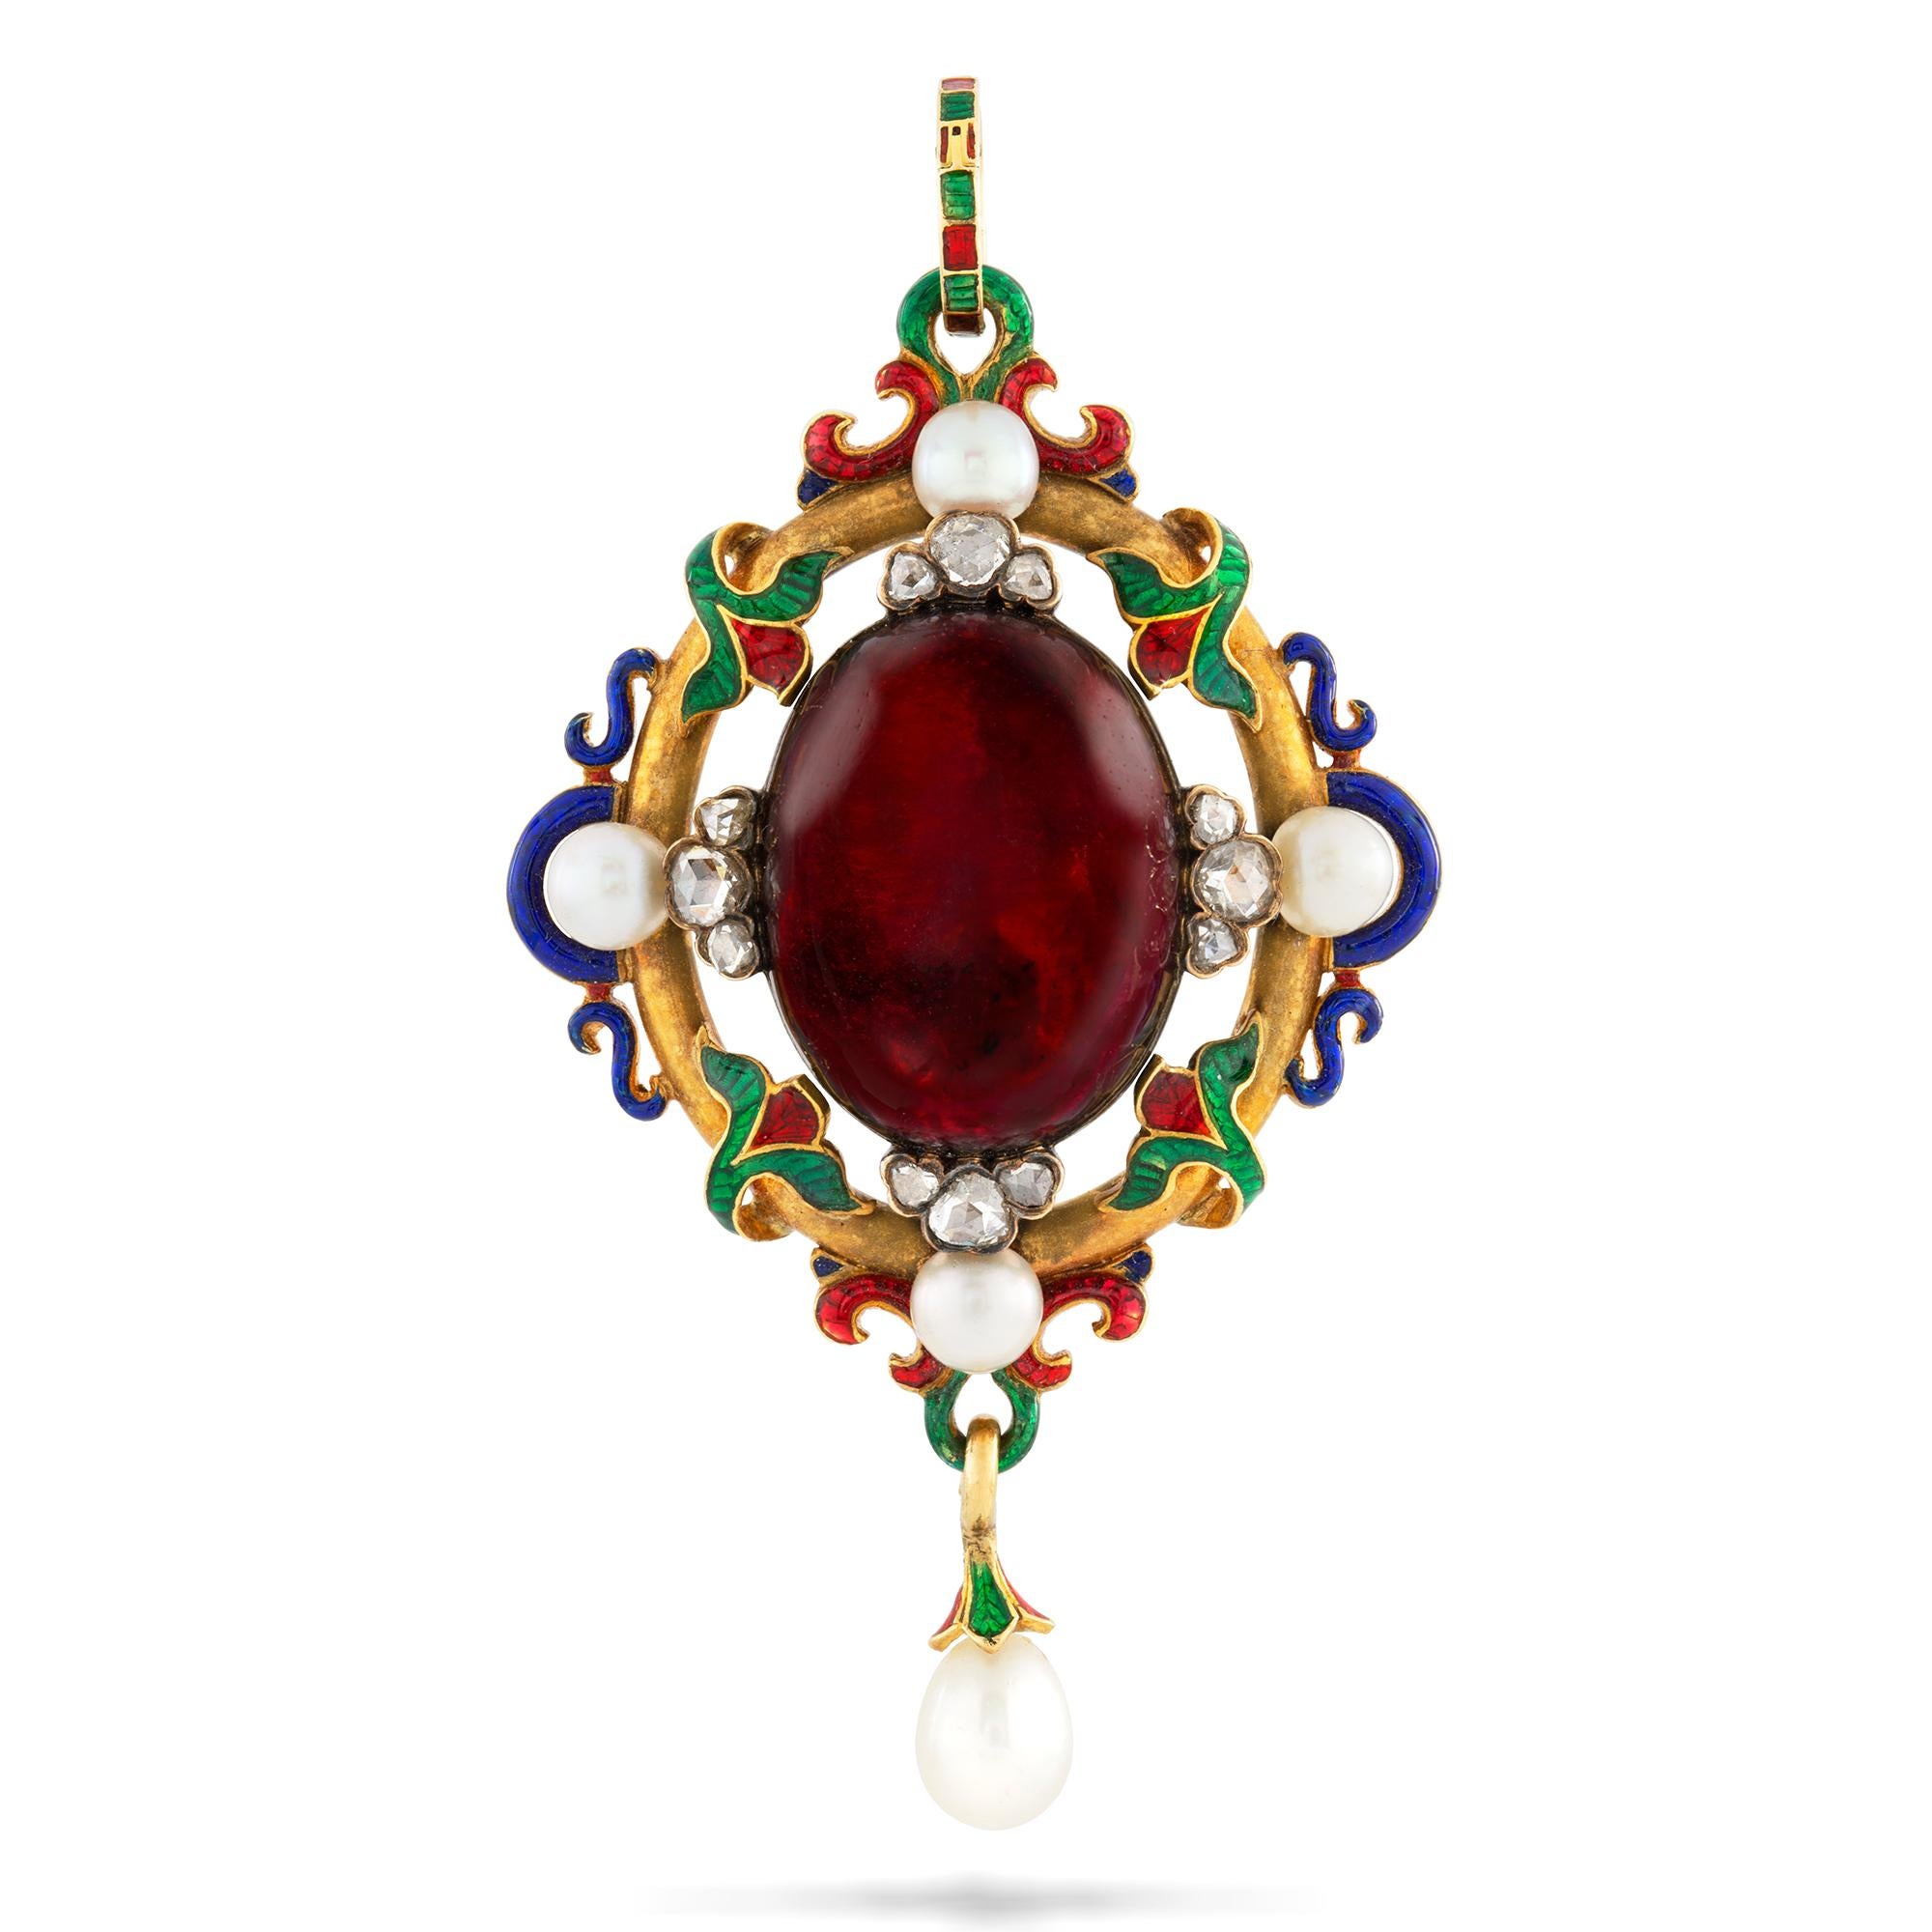 A Victorian Holbeinesque pendant, set to the centre with an oval cabochon-cut garnet, measuring approximately 14.9x19.1 mm, embellished with three rose-cut diamonds and a pearl on each side, all surrounded by a blue, red, green enamel and gold